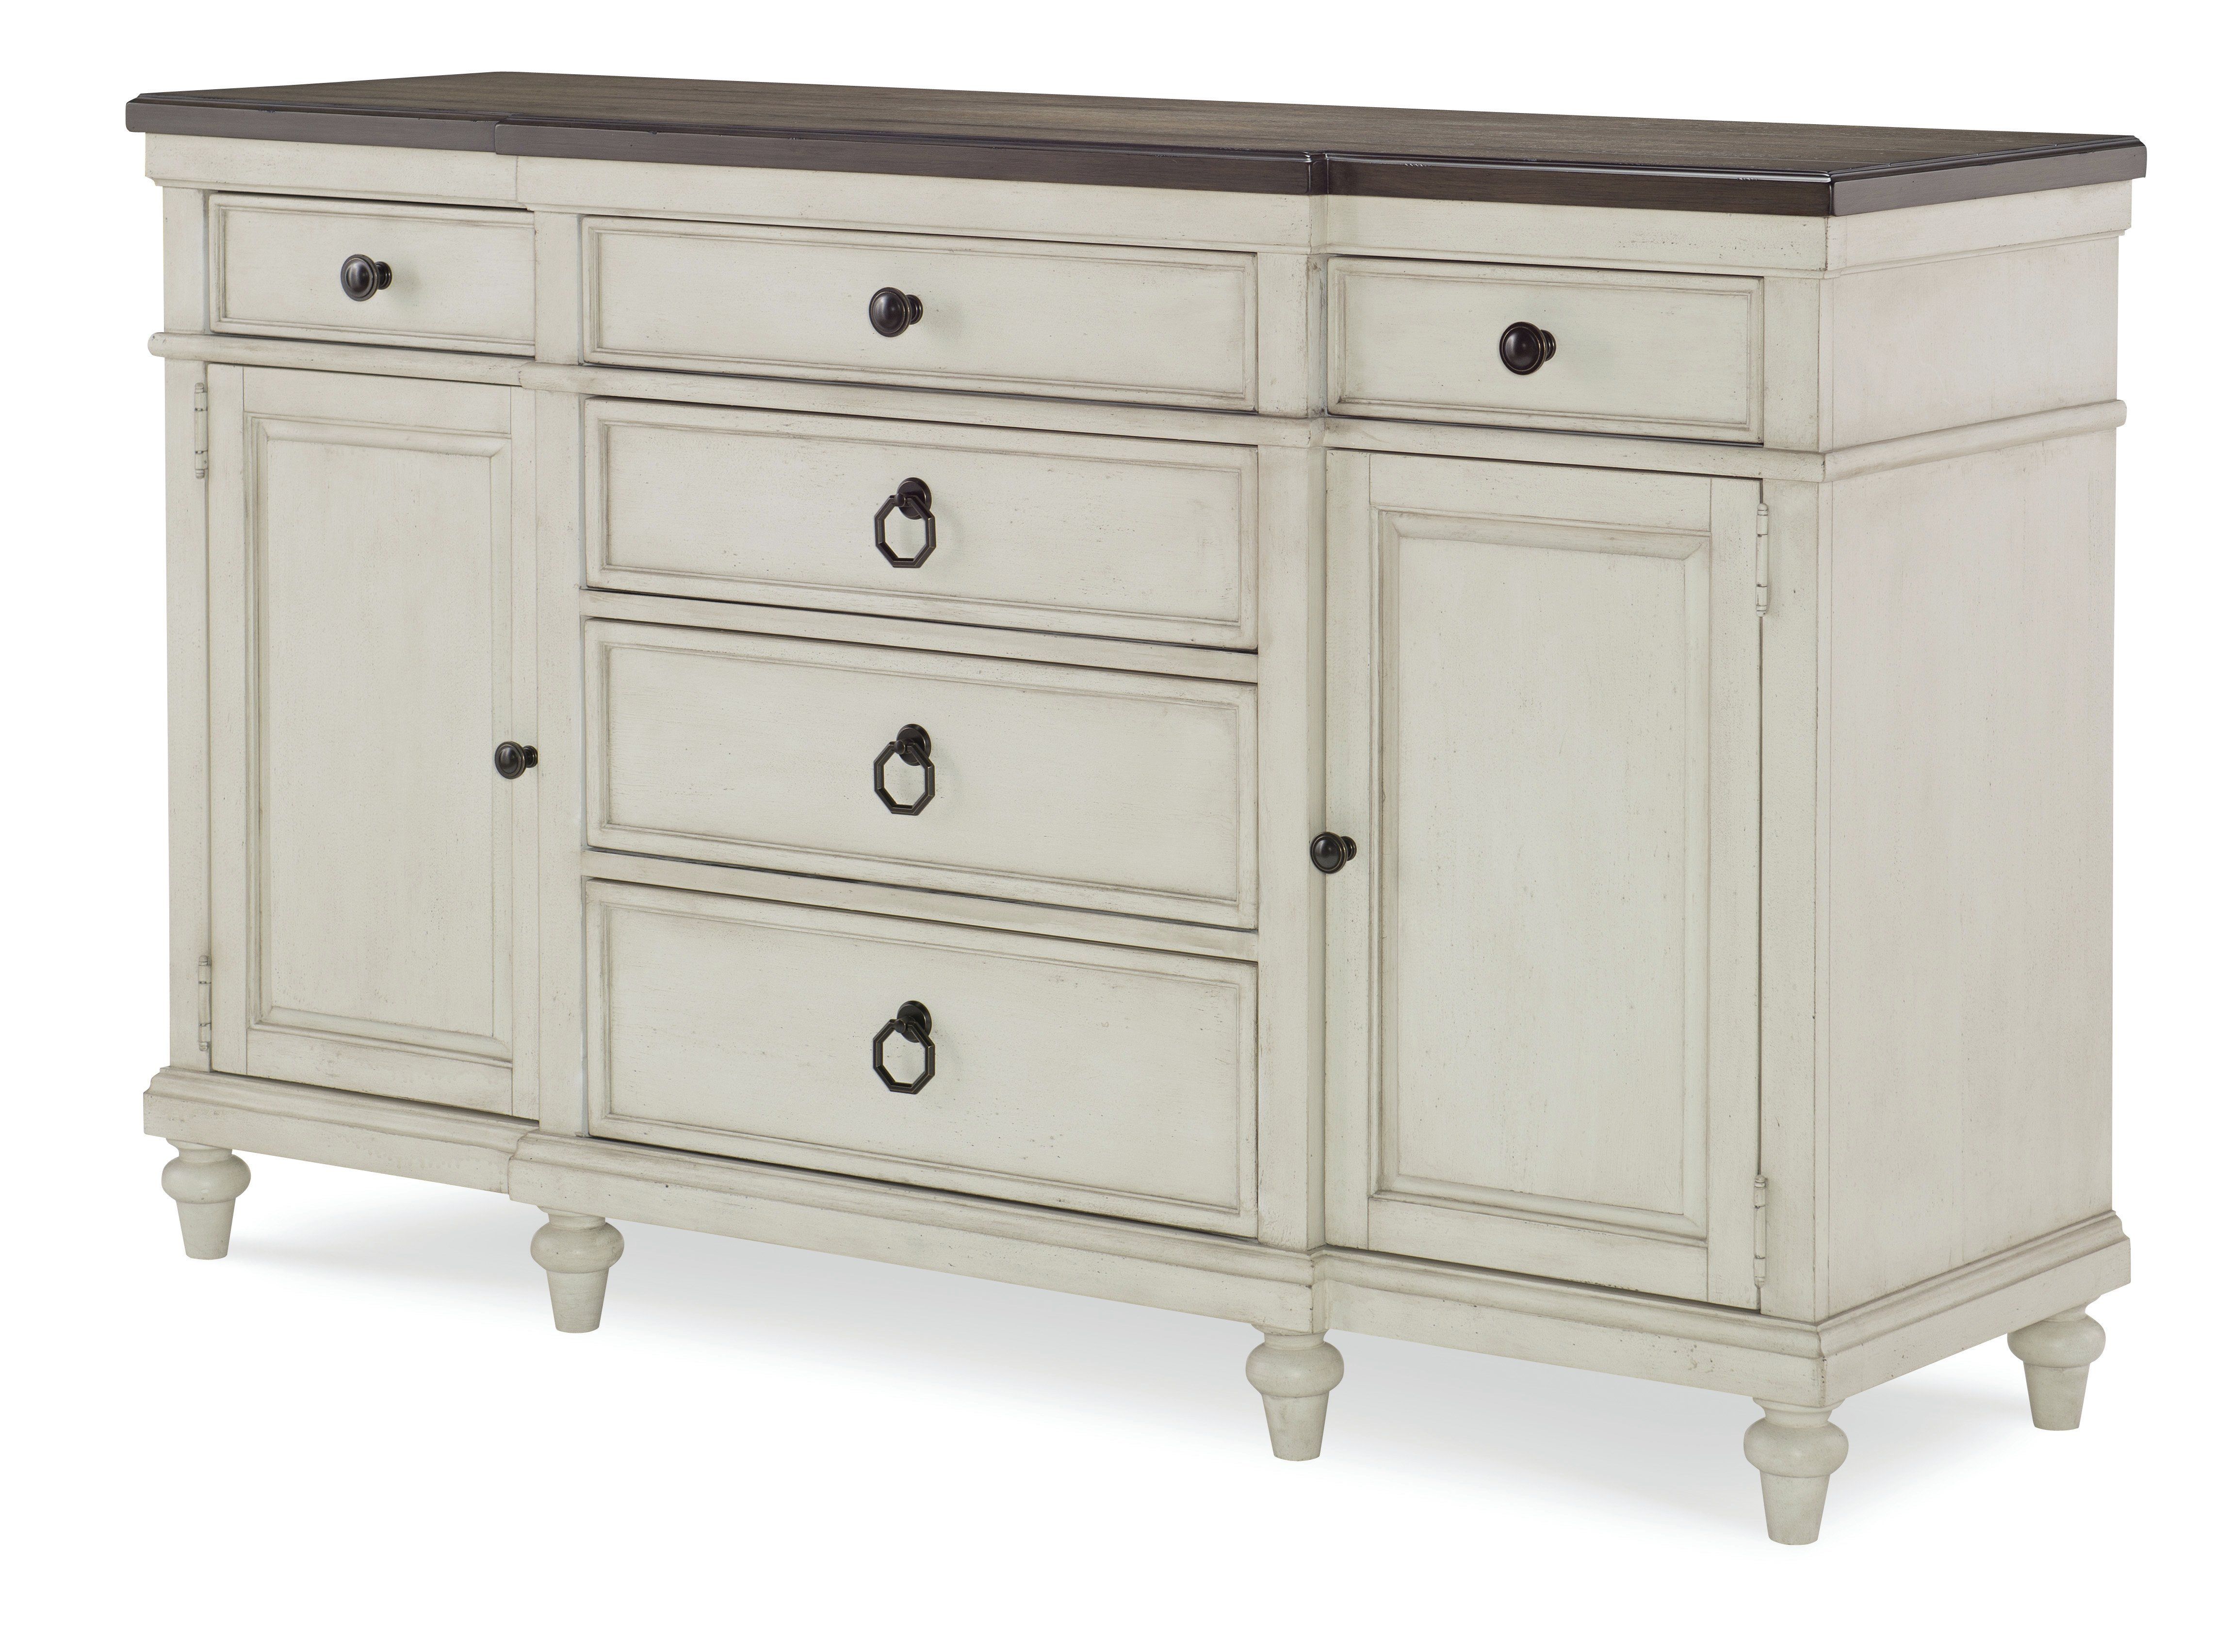 Silverware Storage Equipped Sideboards & Buffets | Joss & Main With Regard To Payton Serving Sideboards (View 6 of 30)